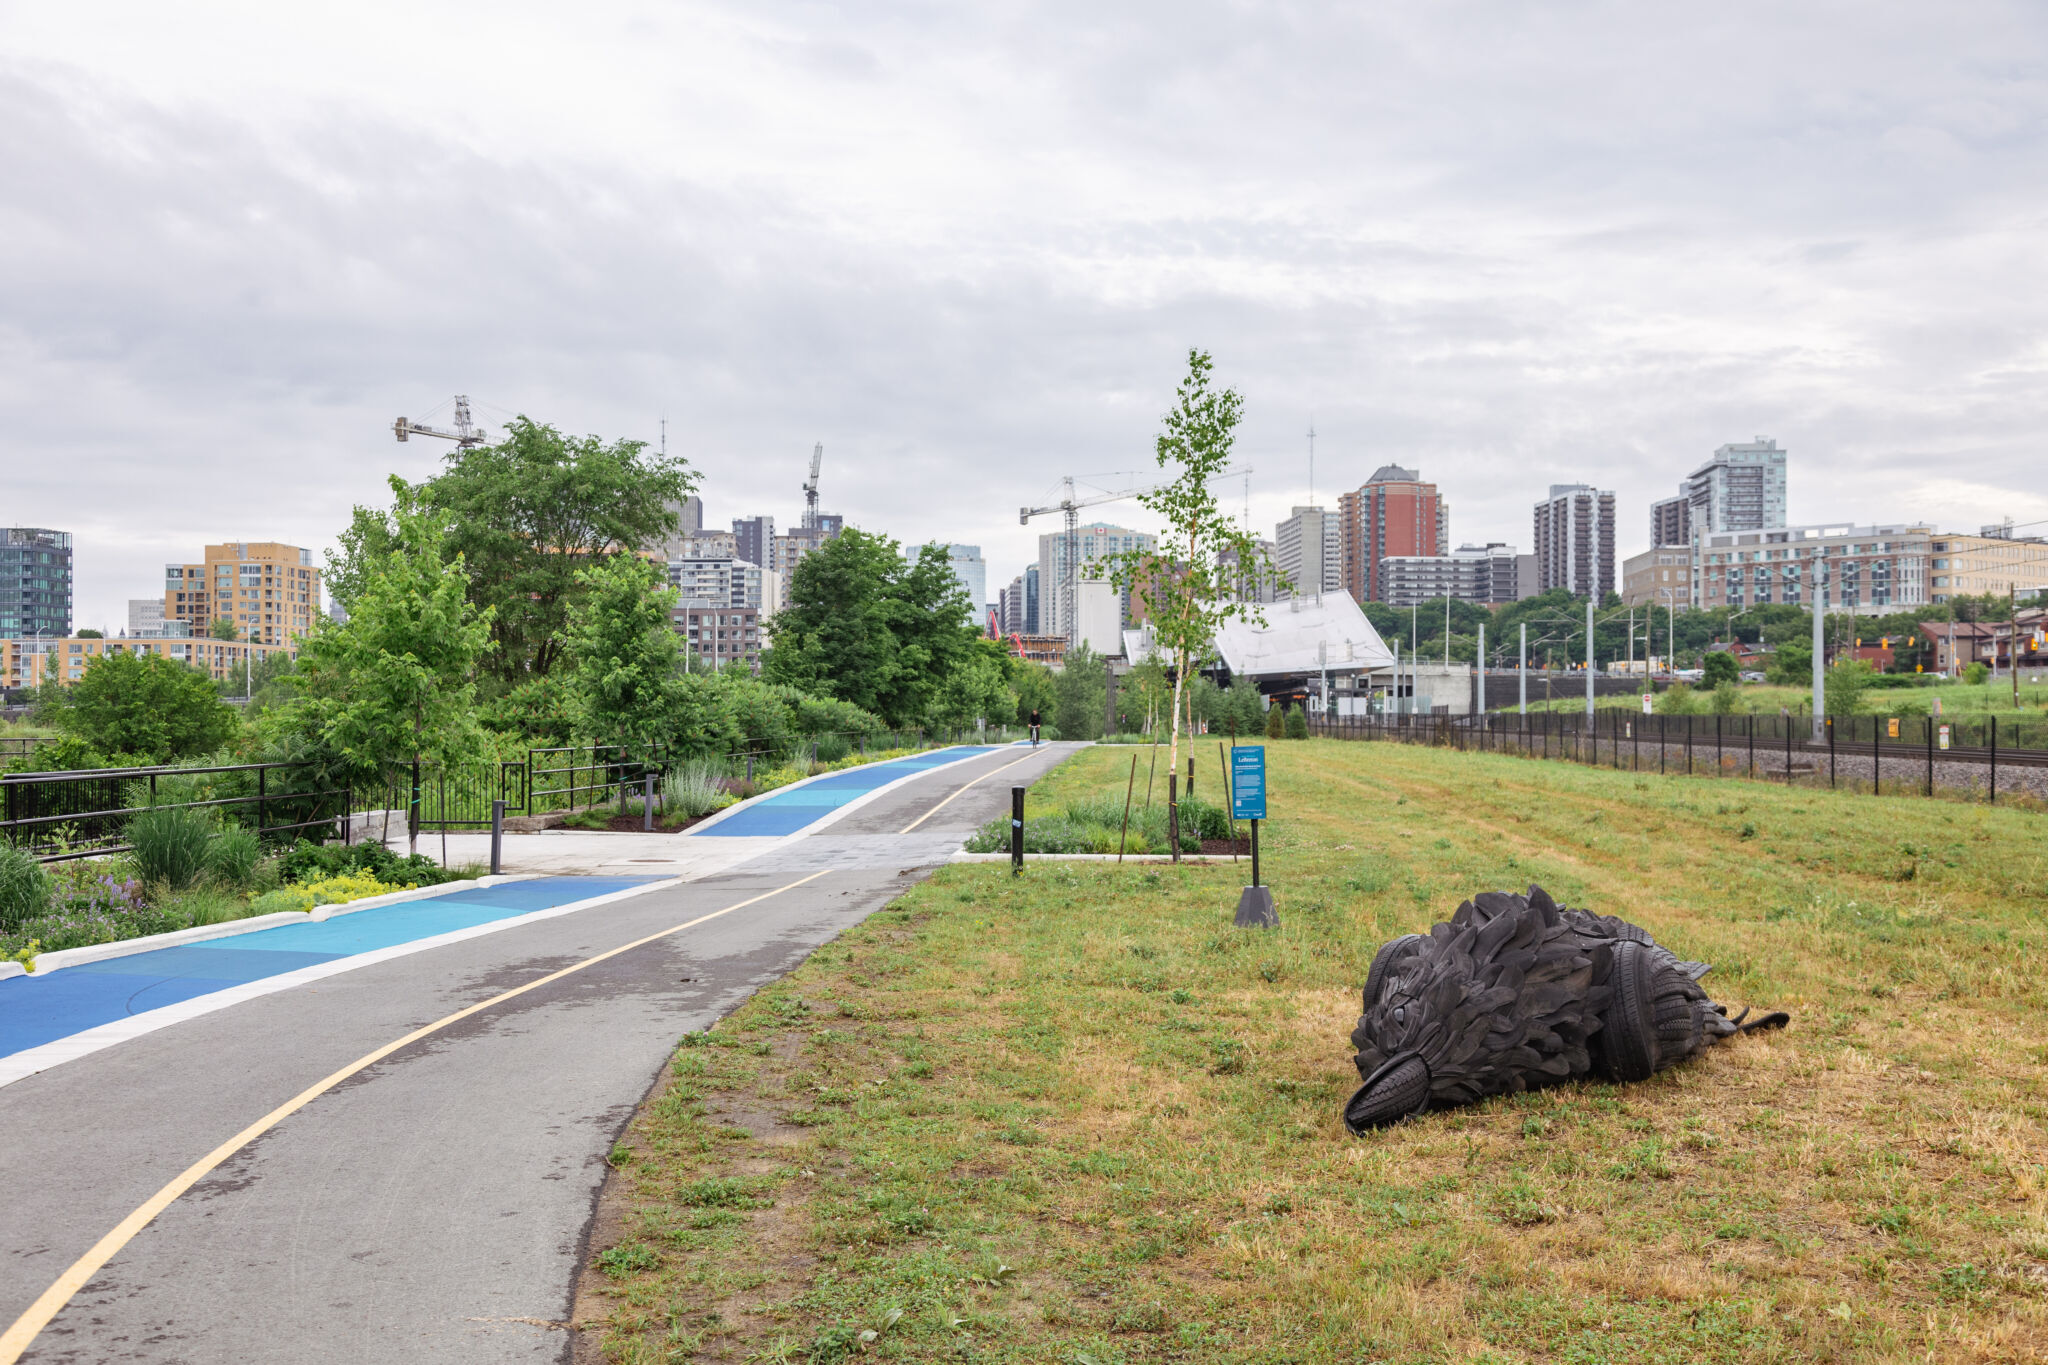 Large crow, made of recycled tires, lying flat on the ground beside the LeBreton Flats Pathway.